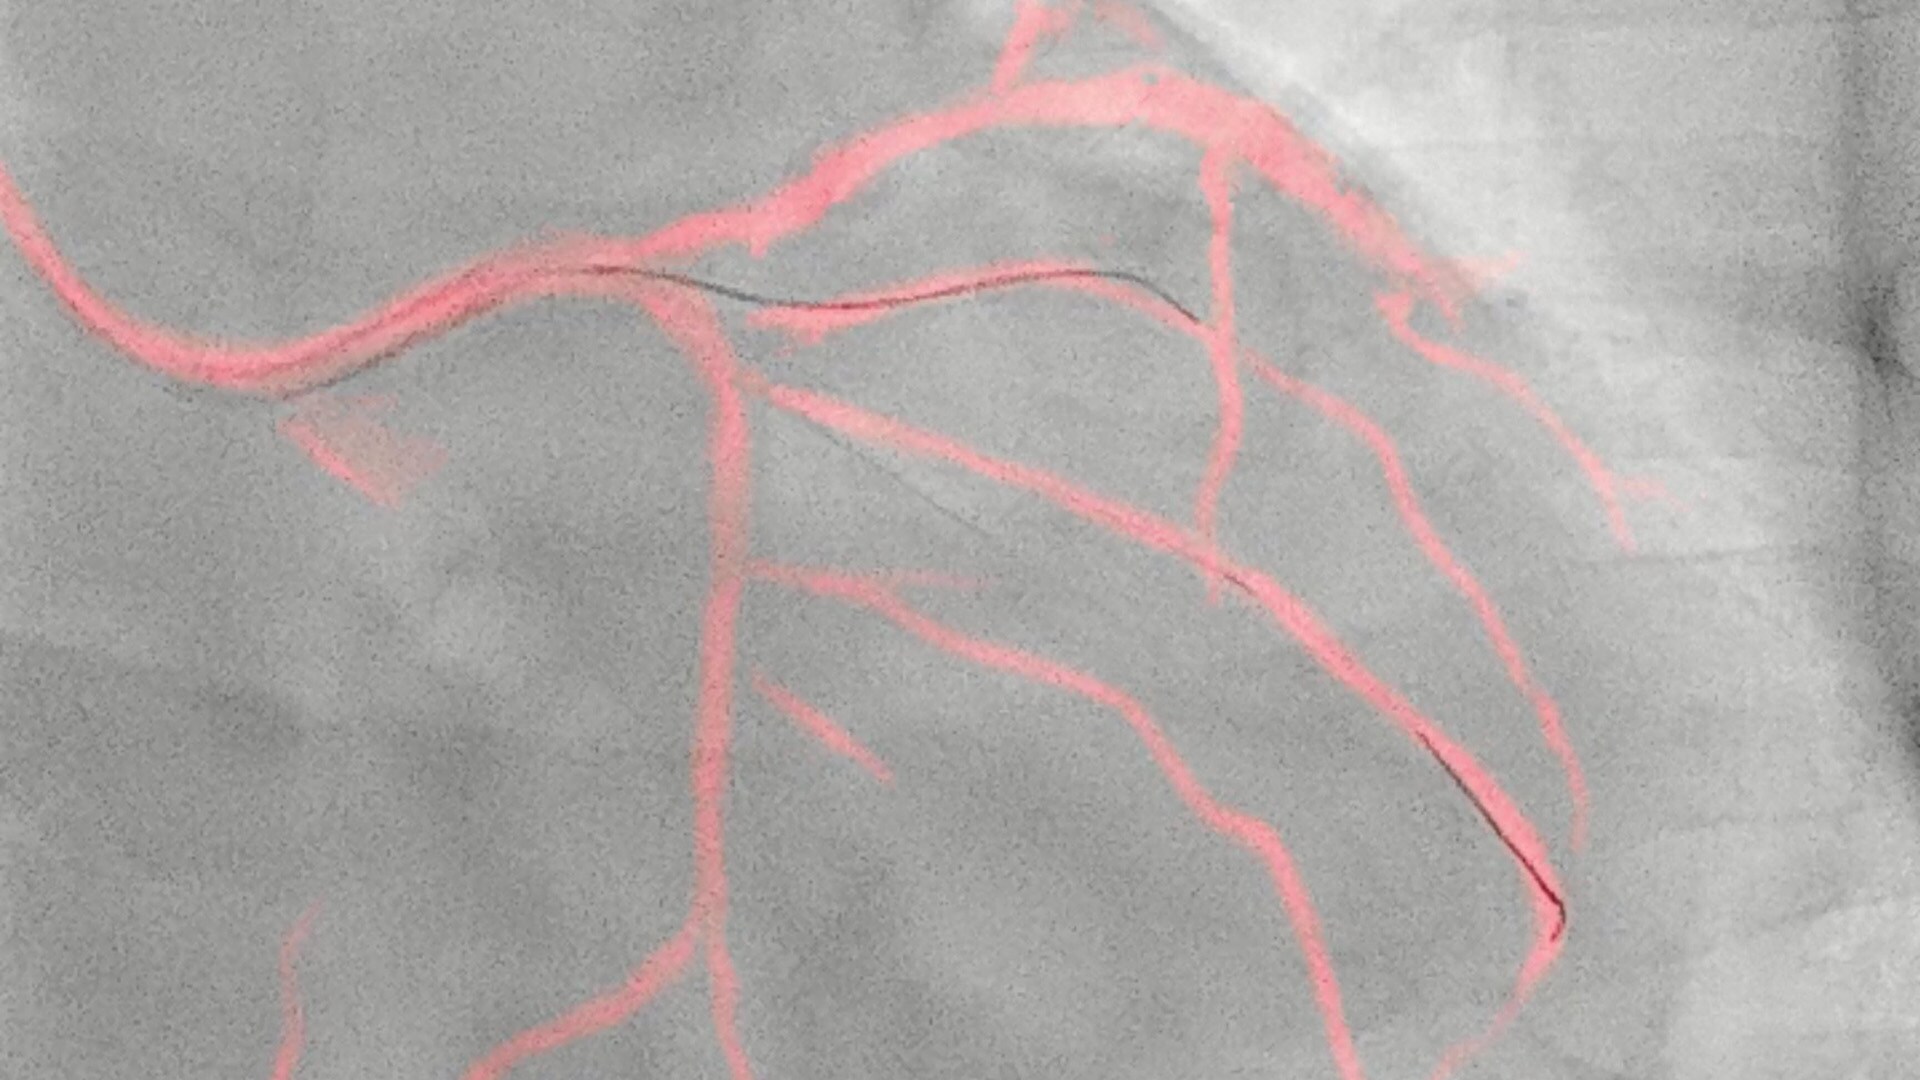 Philips’ image-guided navigation increases safety during coronary interventions and reduces the use of contrast media by an average of 28.8%